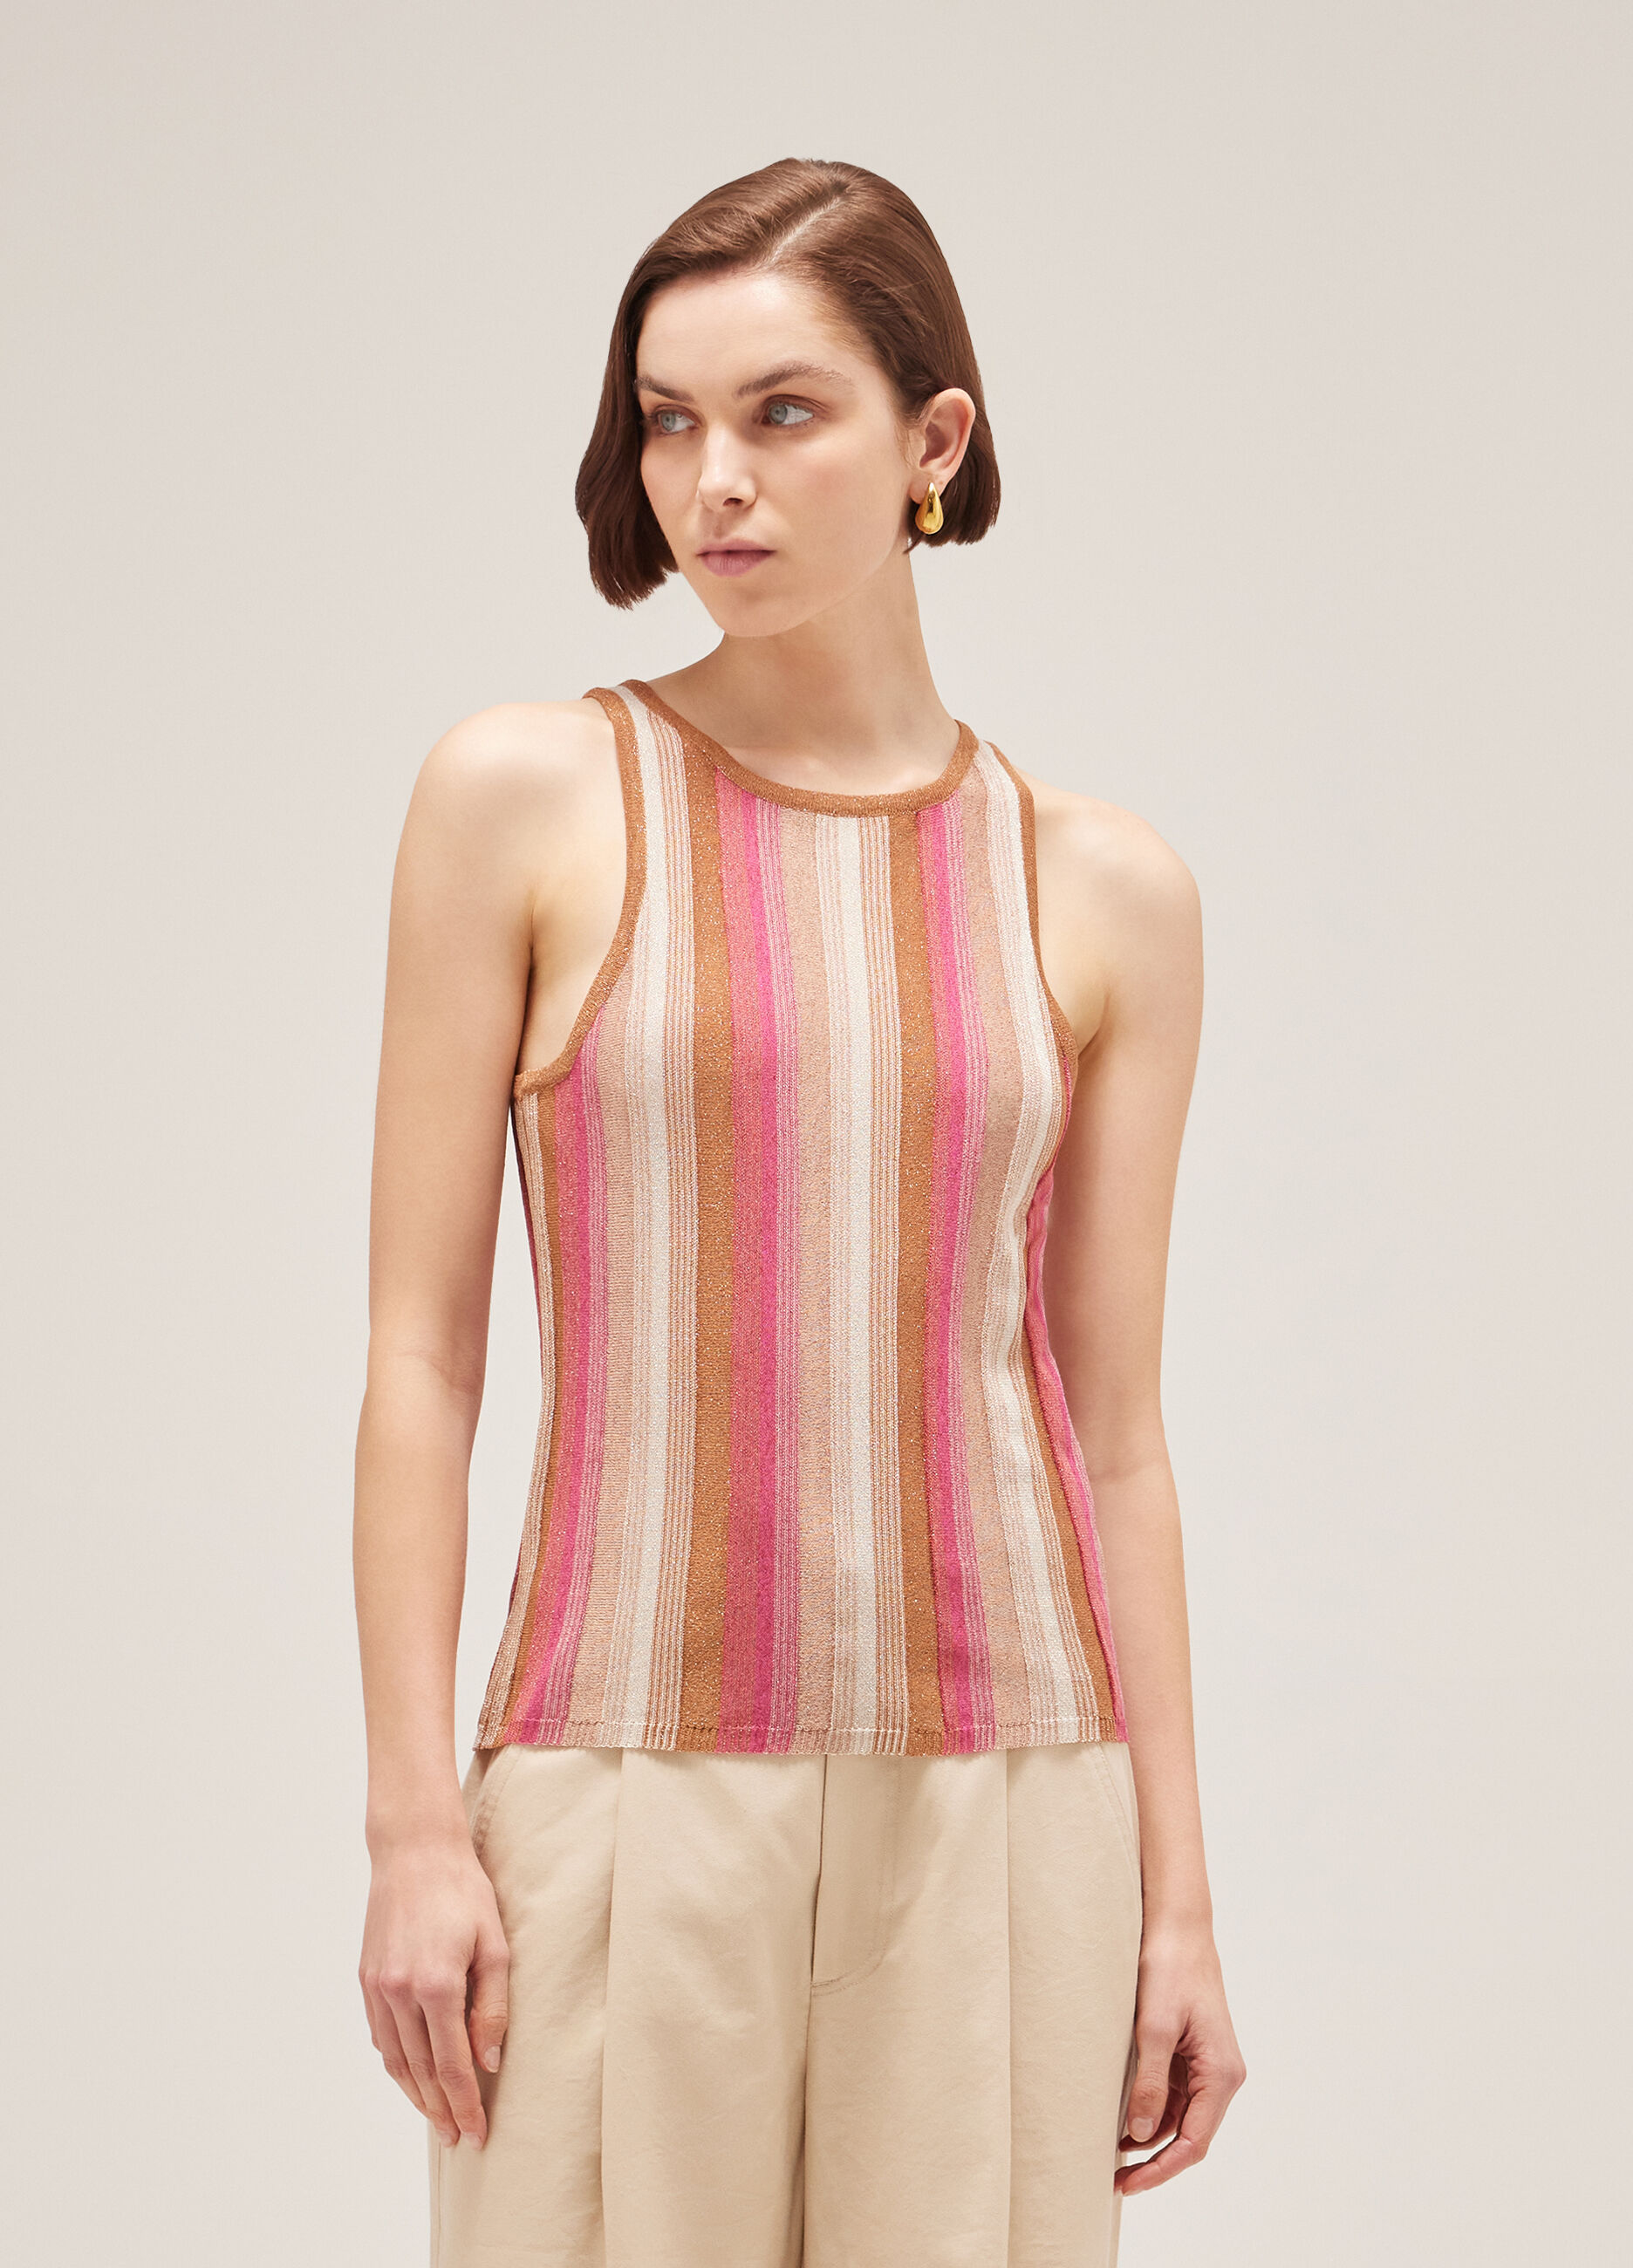 Pink and brown striped sleeveless top